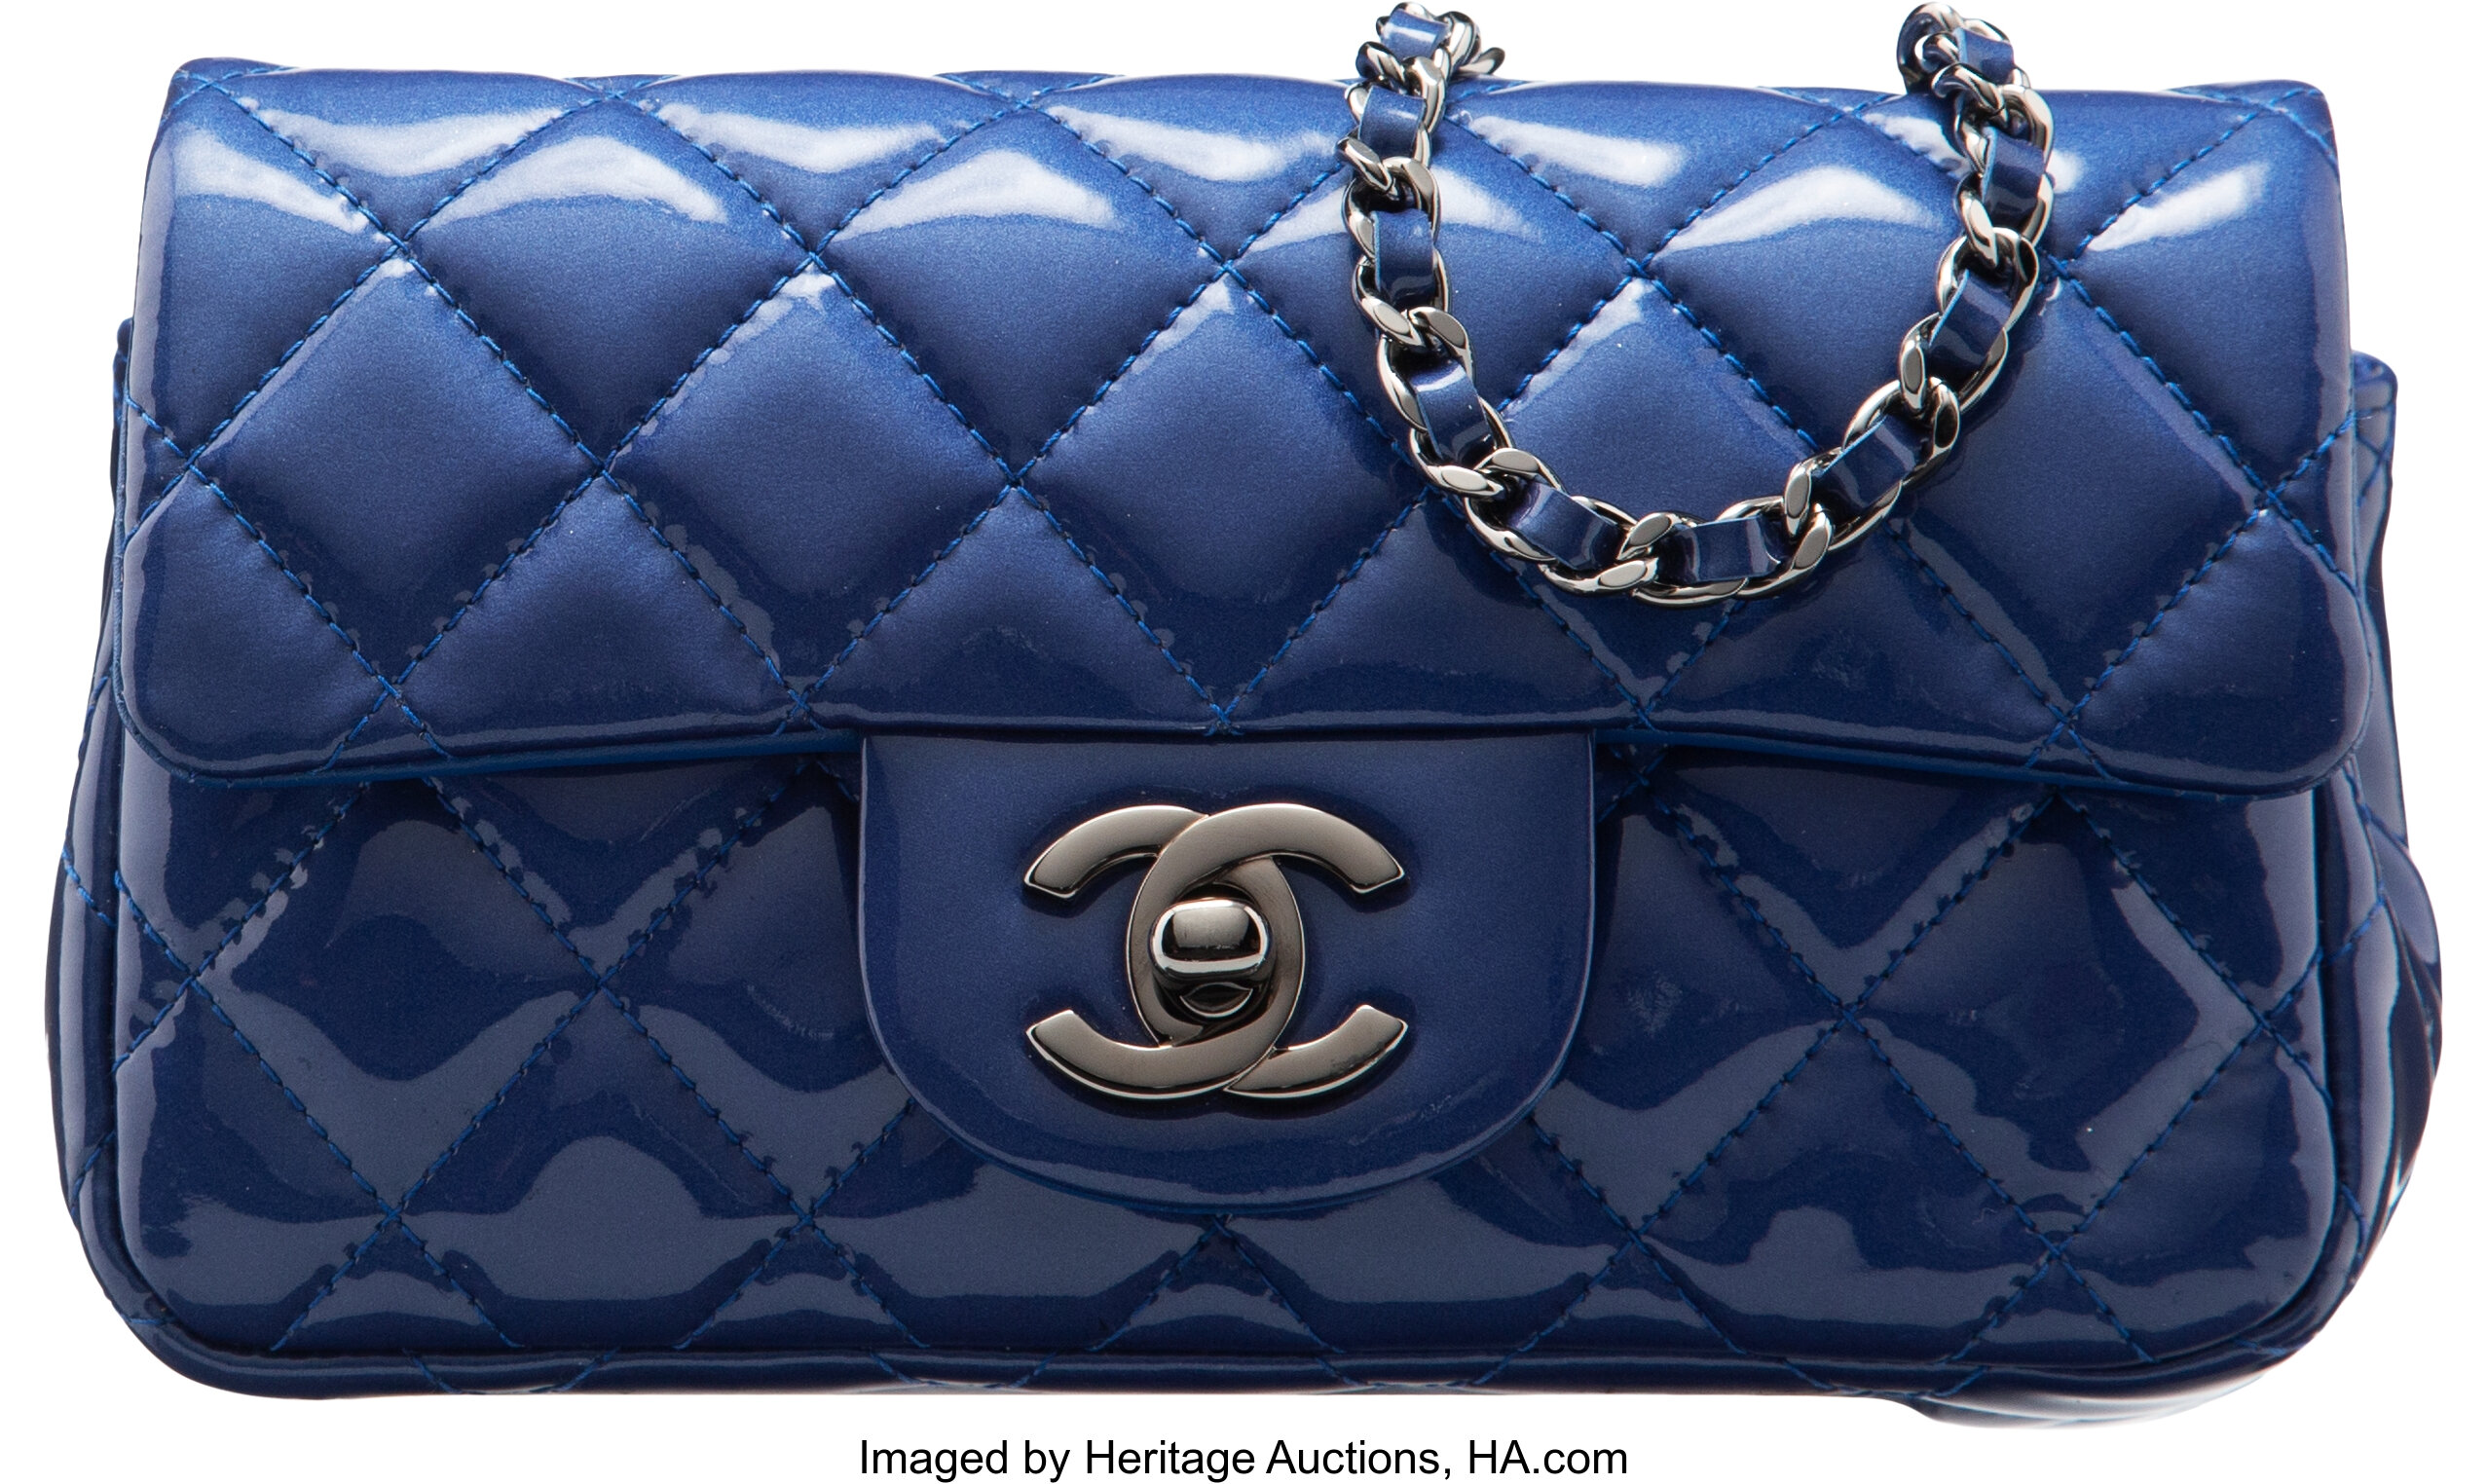 Chanel Blue Patent Leather Mini Flap Bag with Gunmetal Hardware., Lot  #58195